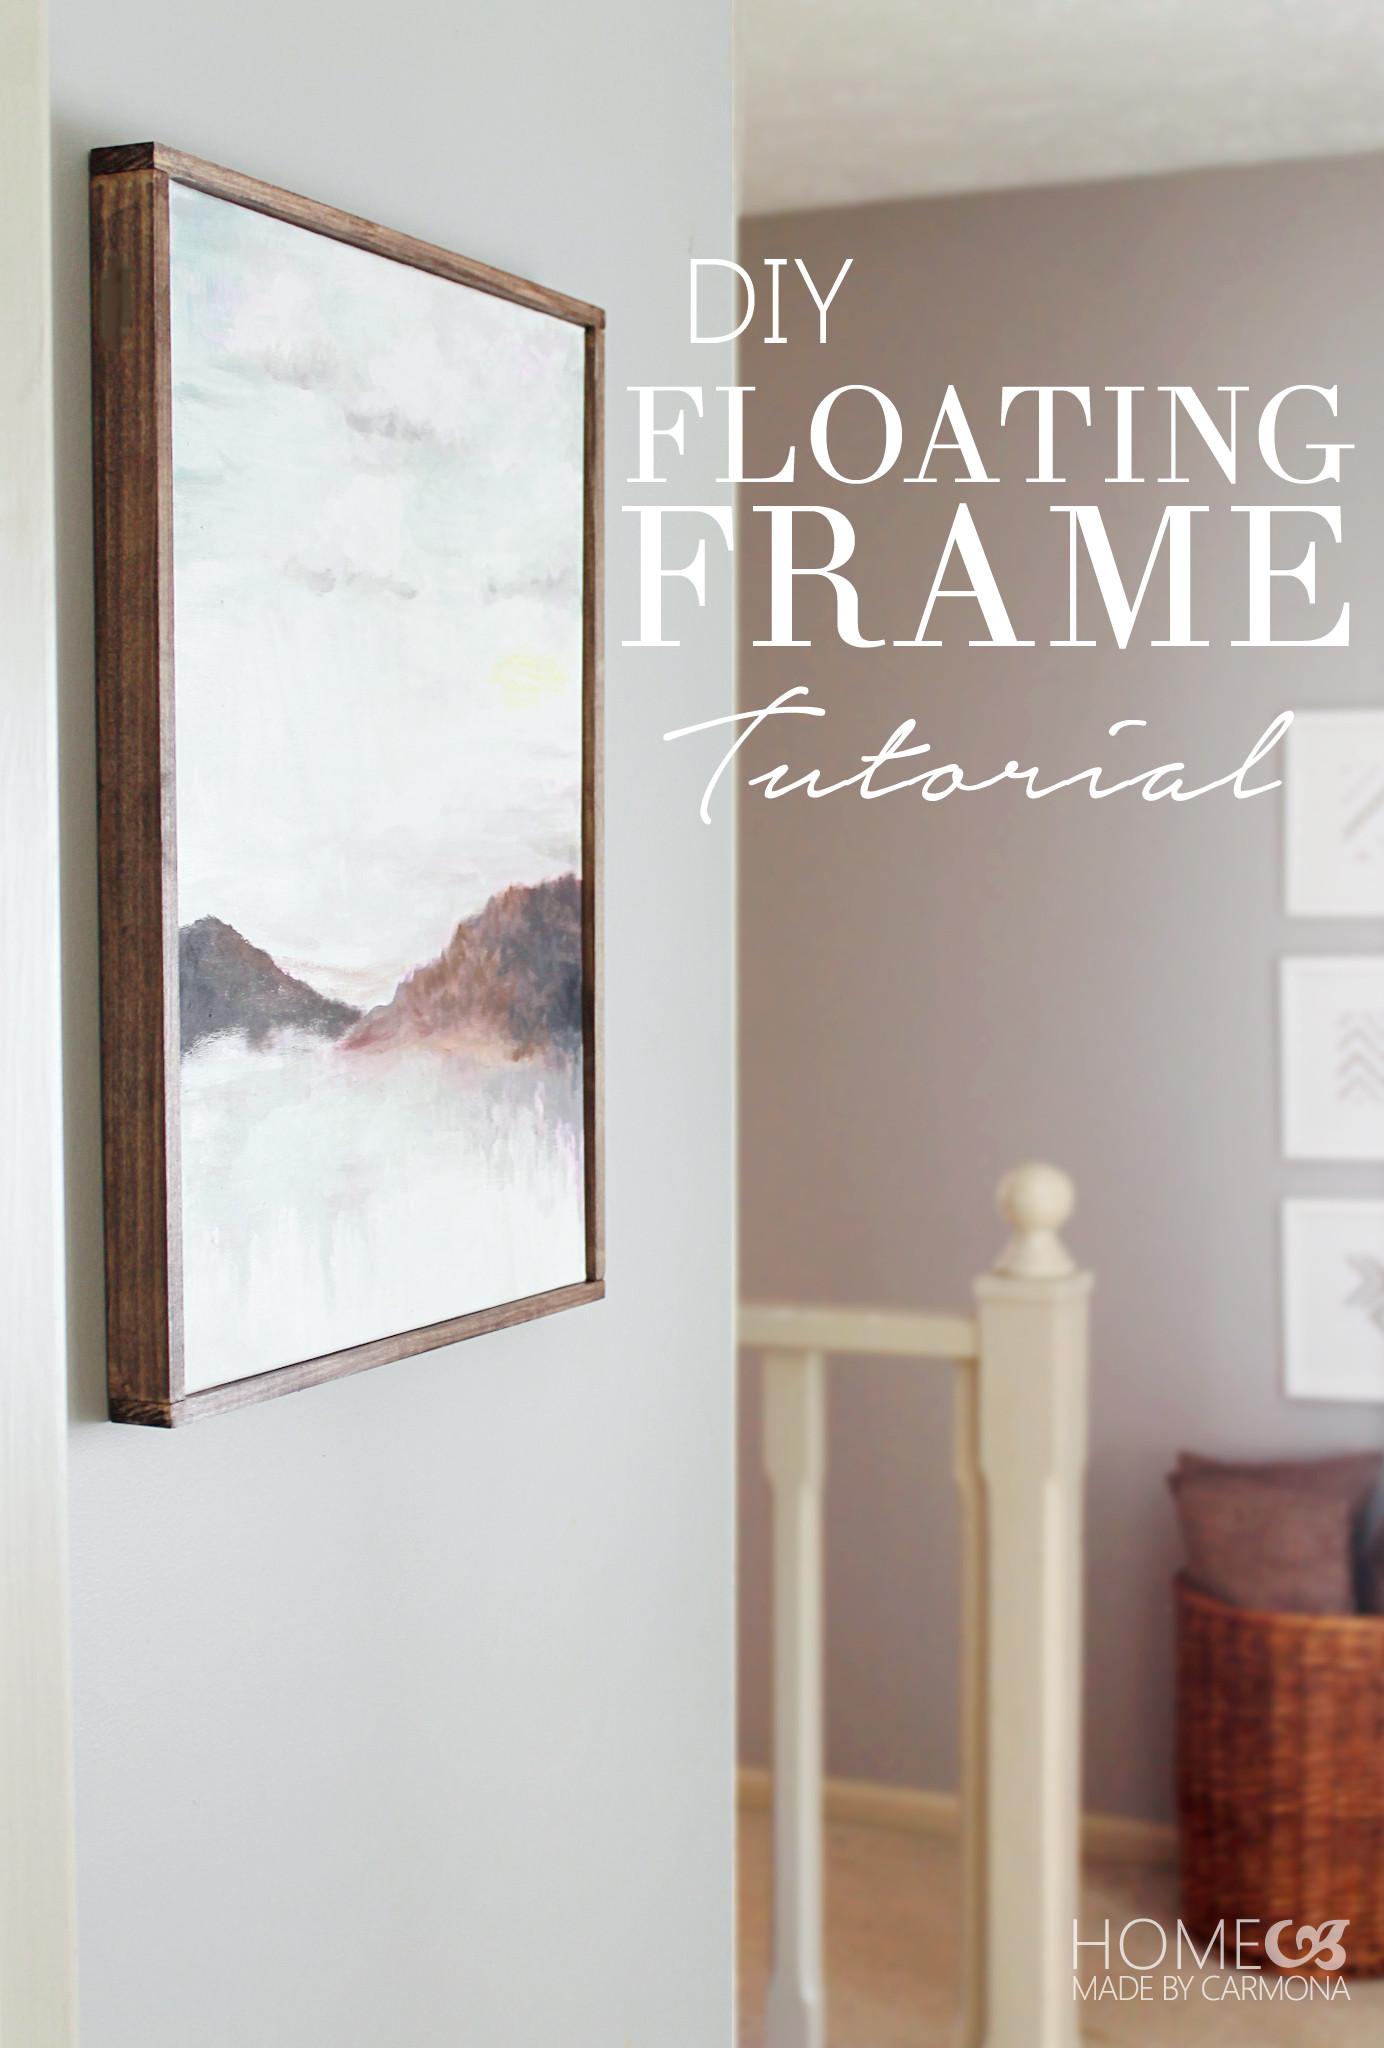 Best ideas about DIY Floating Frame
. Save or Pin DIY Floating Frame Tutorial Now.